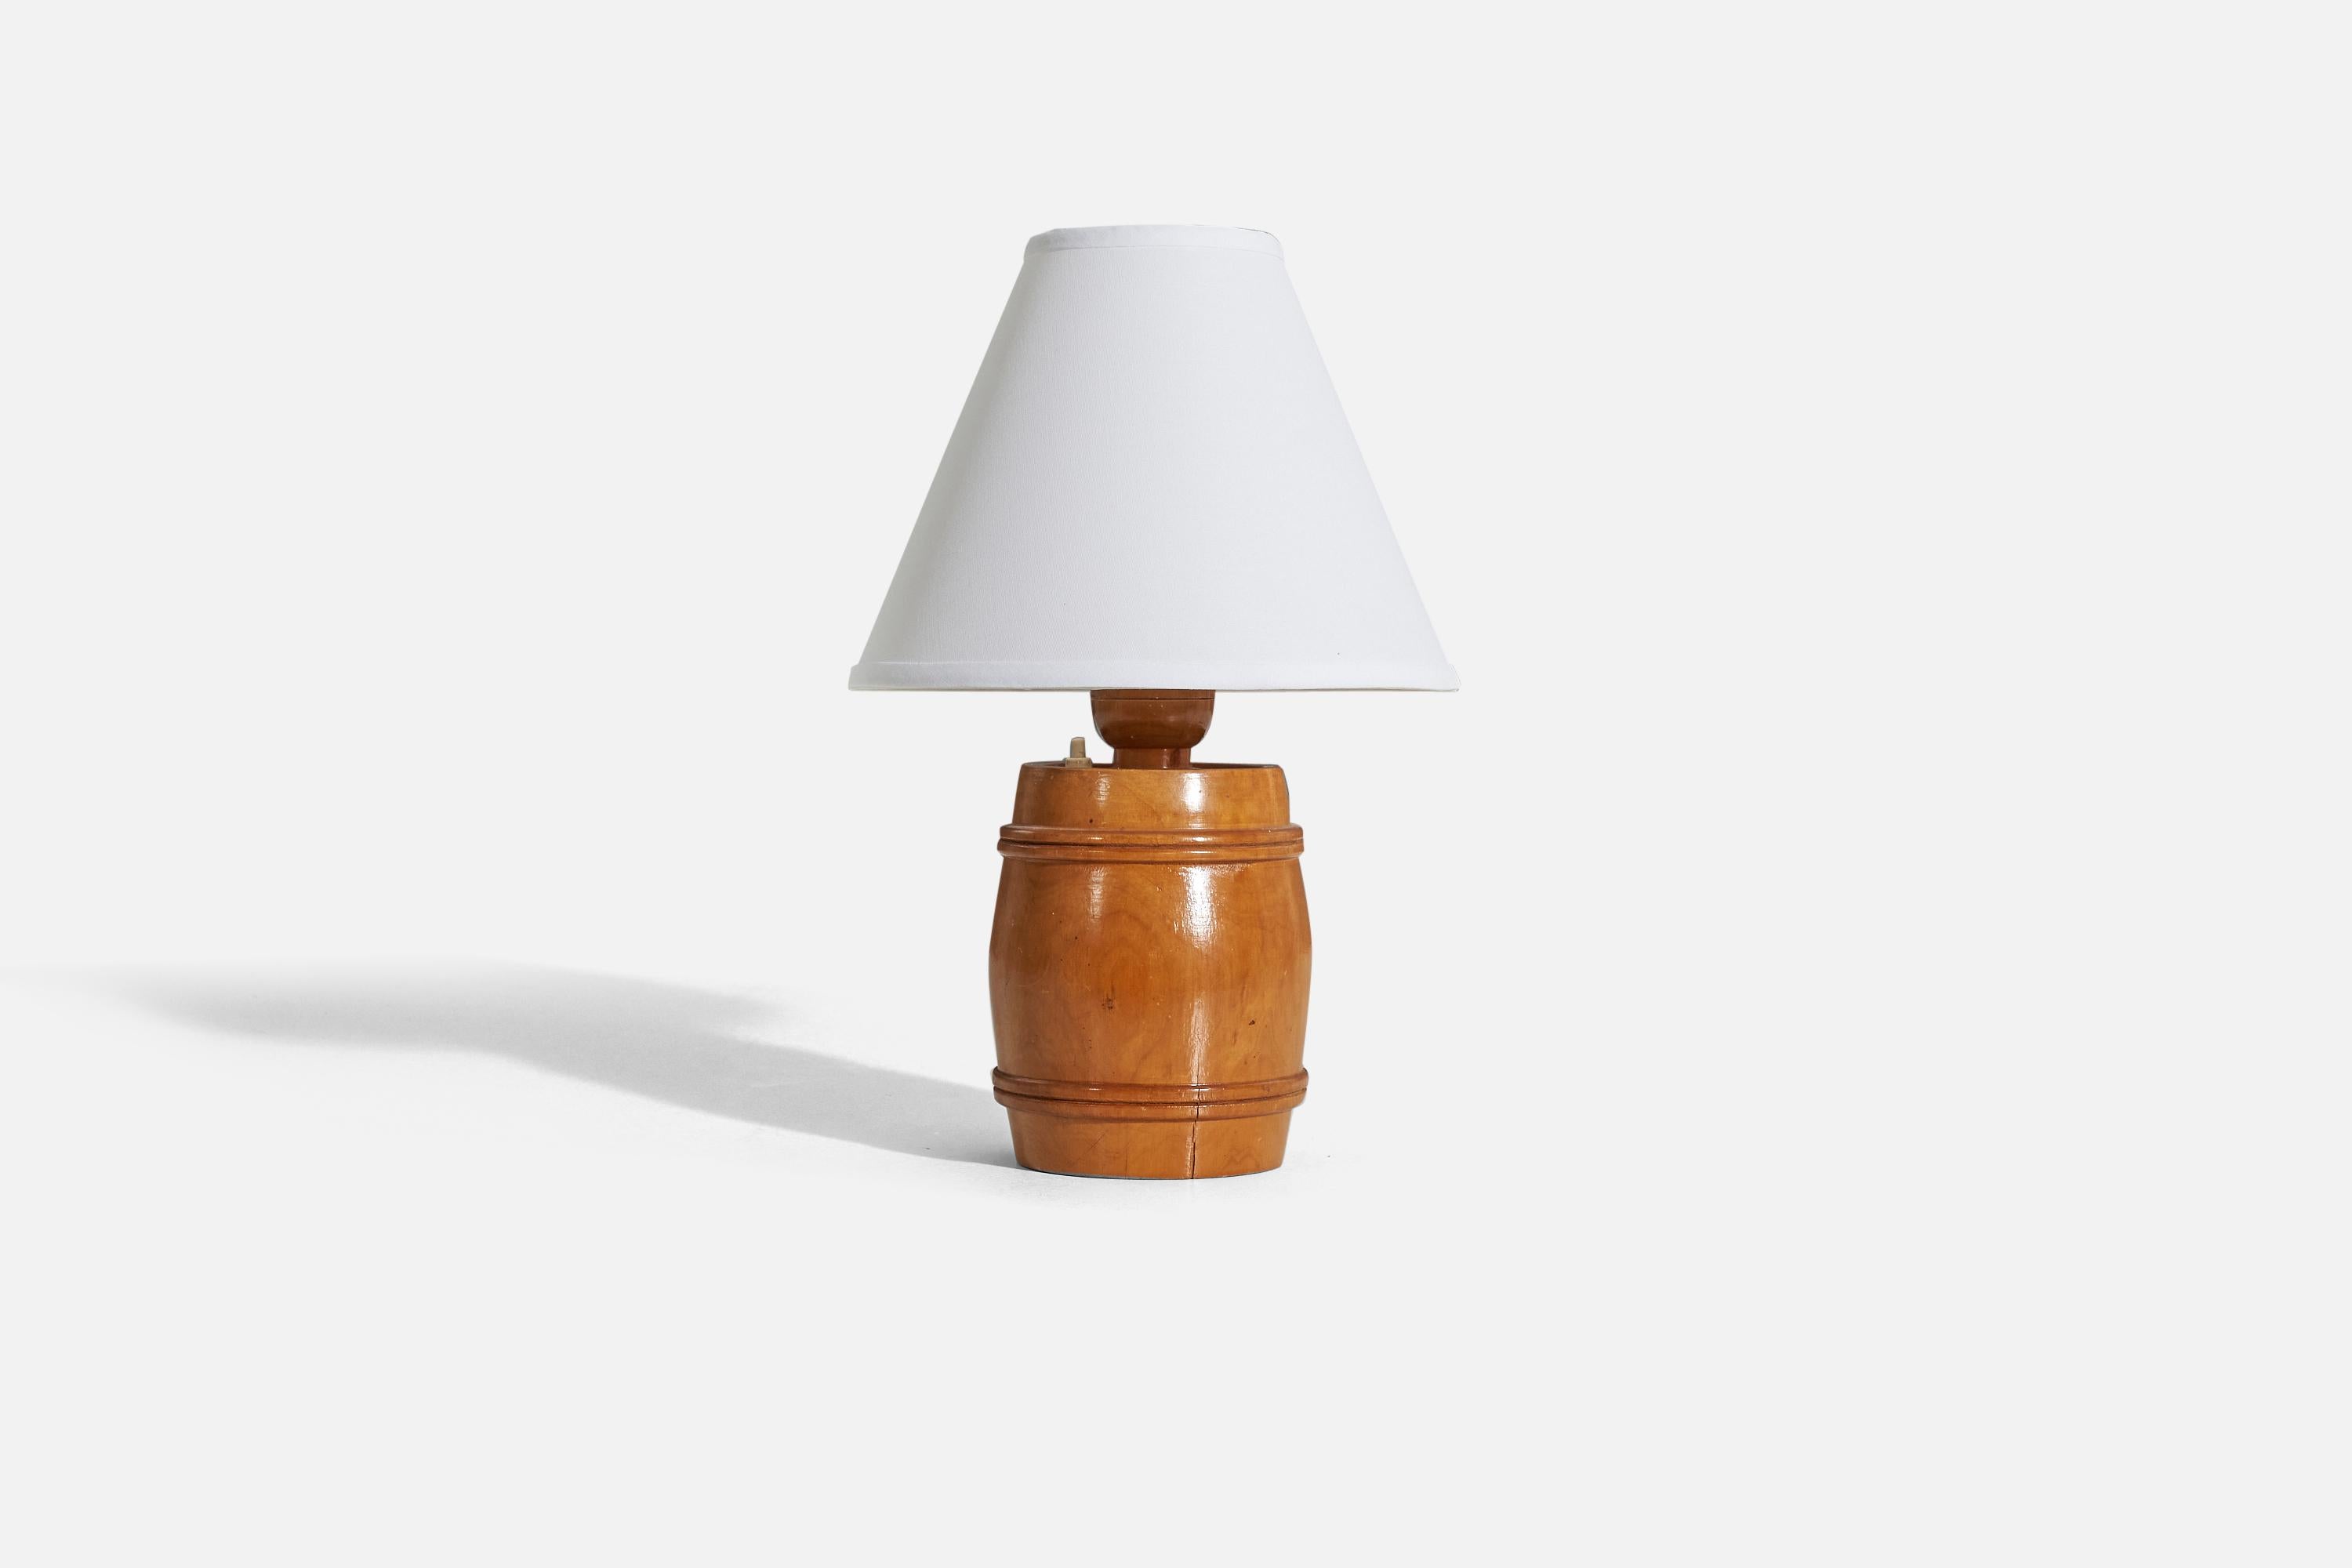 A wooden table lamp designed and produced in Sweden, 1950s. 

Sold without lampshade. 
Dimensions of Lamp (inches) : 11.375 x 6 x 6 (H x W x D)
Dimensions of Shade (inches) : 4 x 10 x 8 (T x B x H)
Dimension of Lamp with Shade (inches) : 15.375